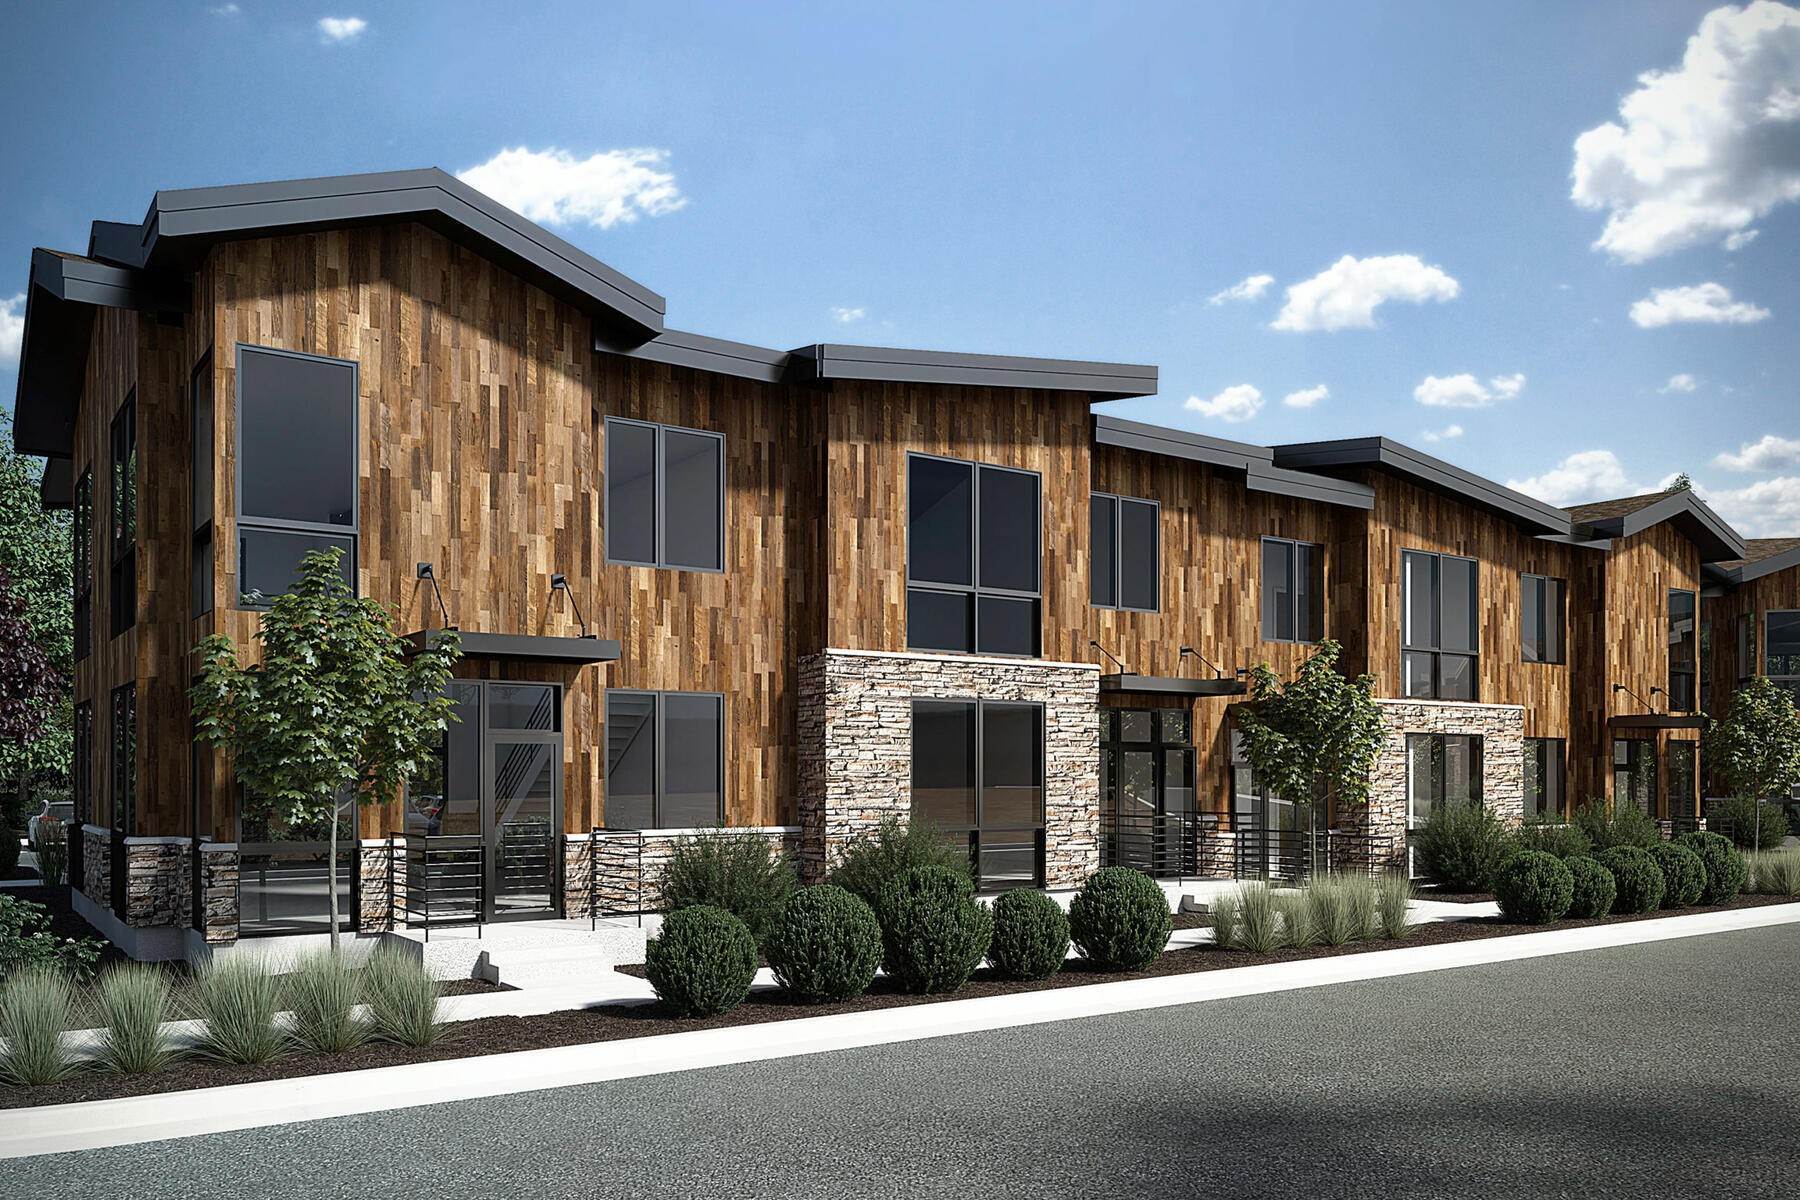 Property for Sale at Coming This Summer! Wasatch Springs Commercial/Mixed-Use Development 1026 W Wasatch Spring Rd #X-1 Kamas, Utah 84036 United States